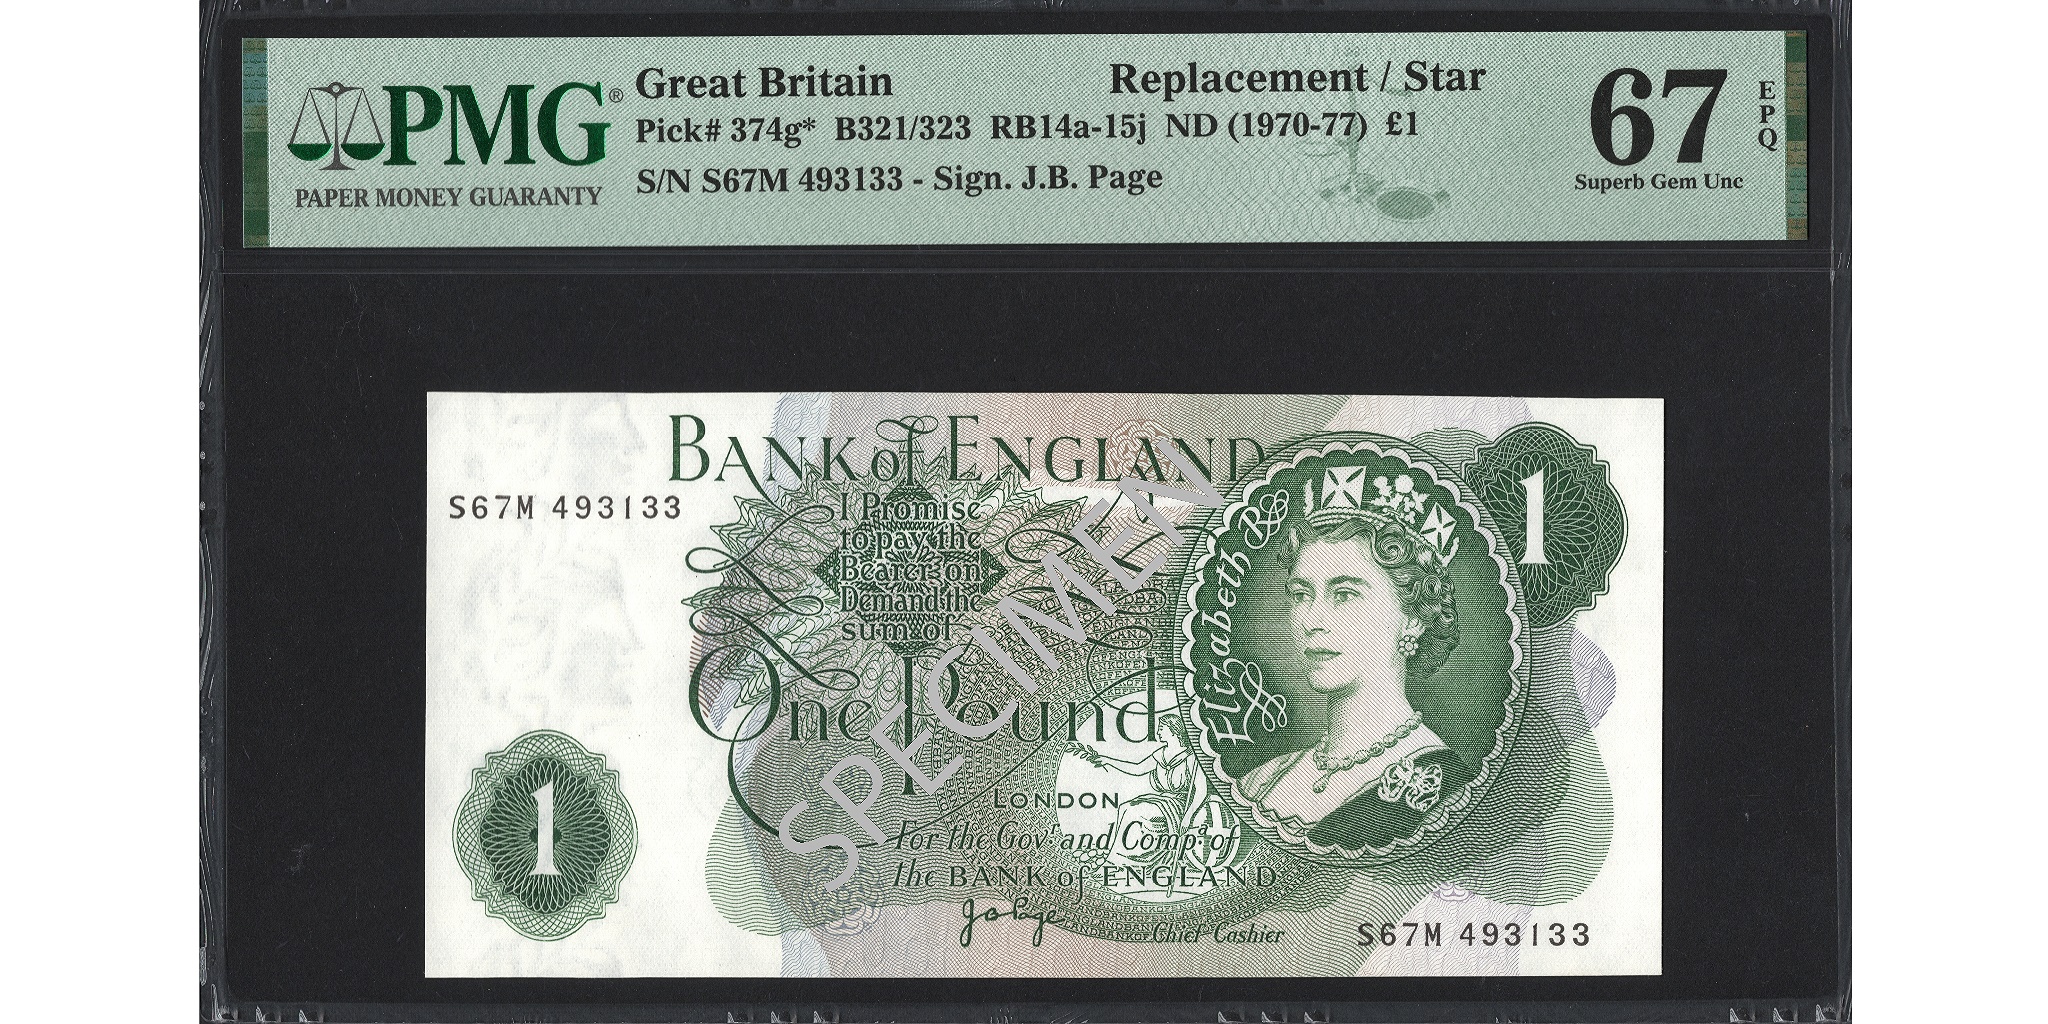 John Page/John Fforde £1 Banknotes - Prefixes S67M - Bank of England - Scarce, S67M not listed in EPM 9 list of known pairs